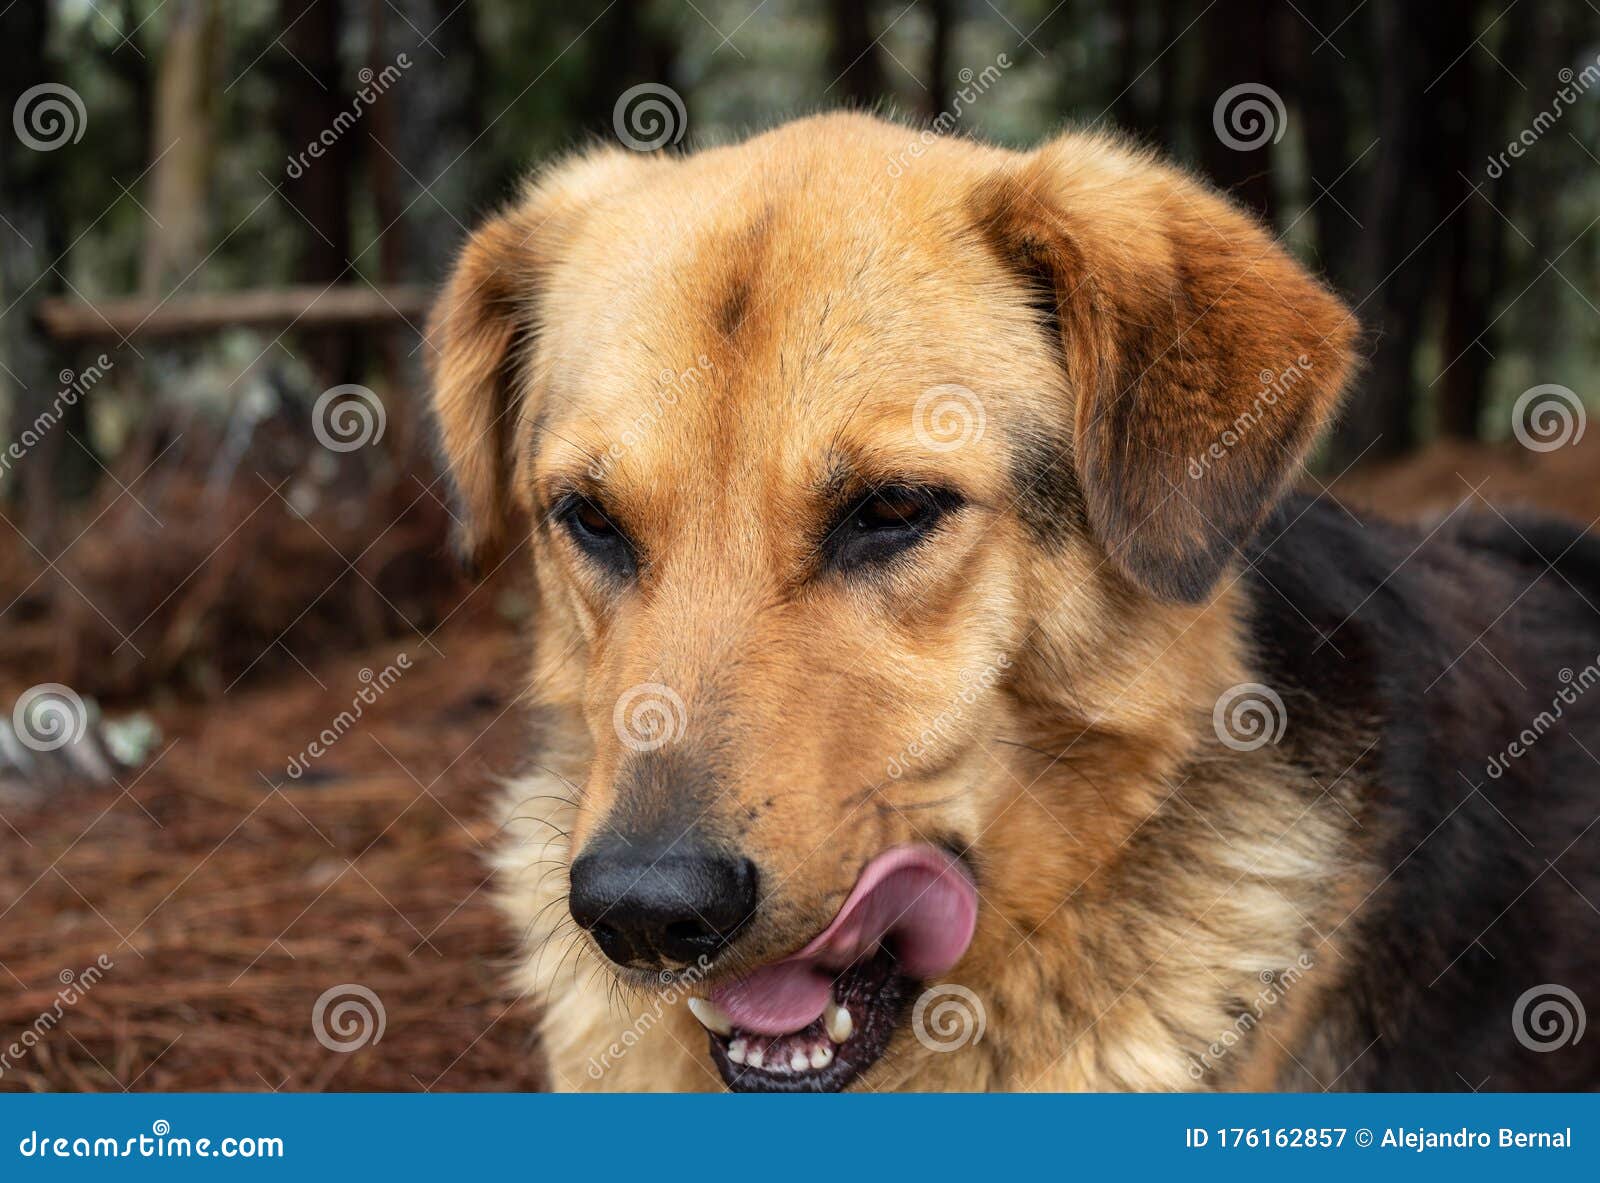 closed up portrait to a yellow/black mixed breed dog  with its tongue hanging out in savoring actitud